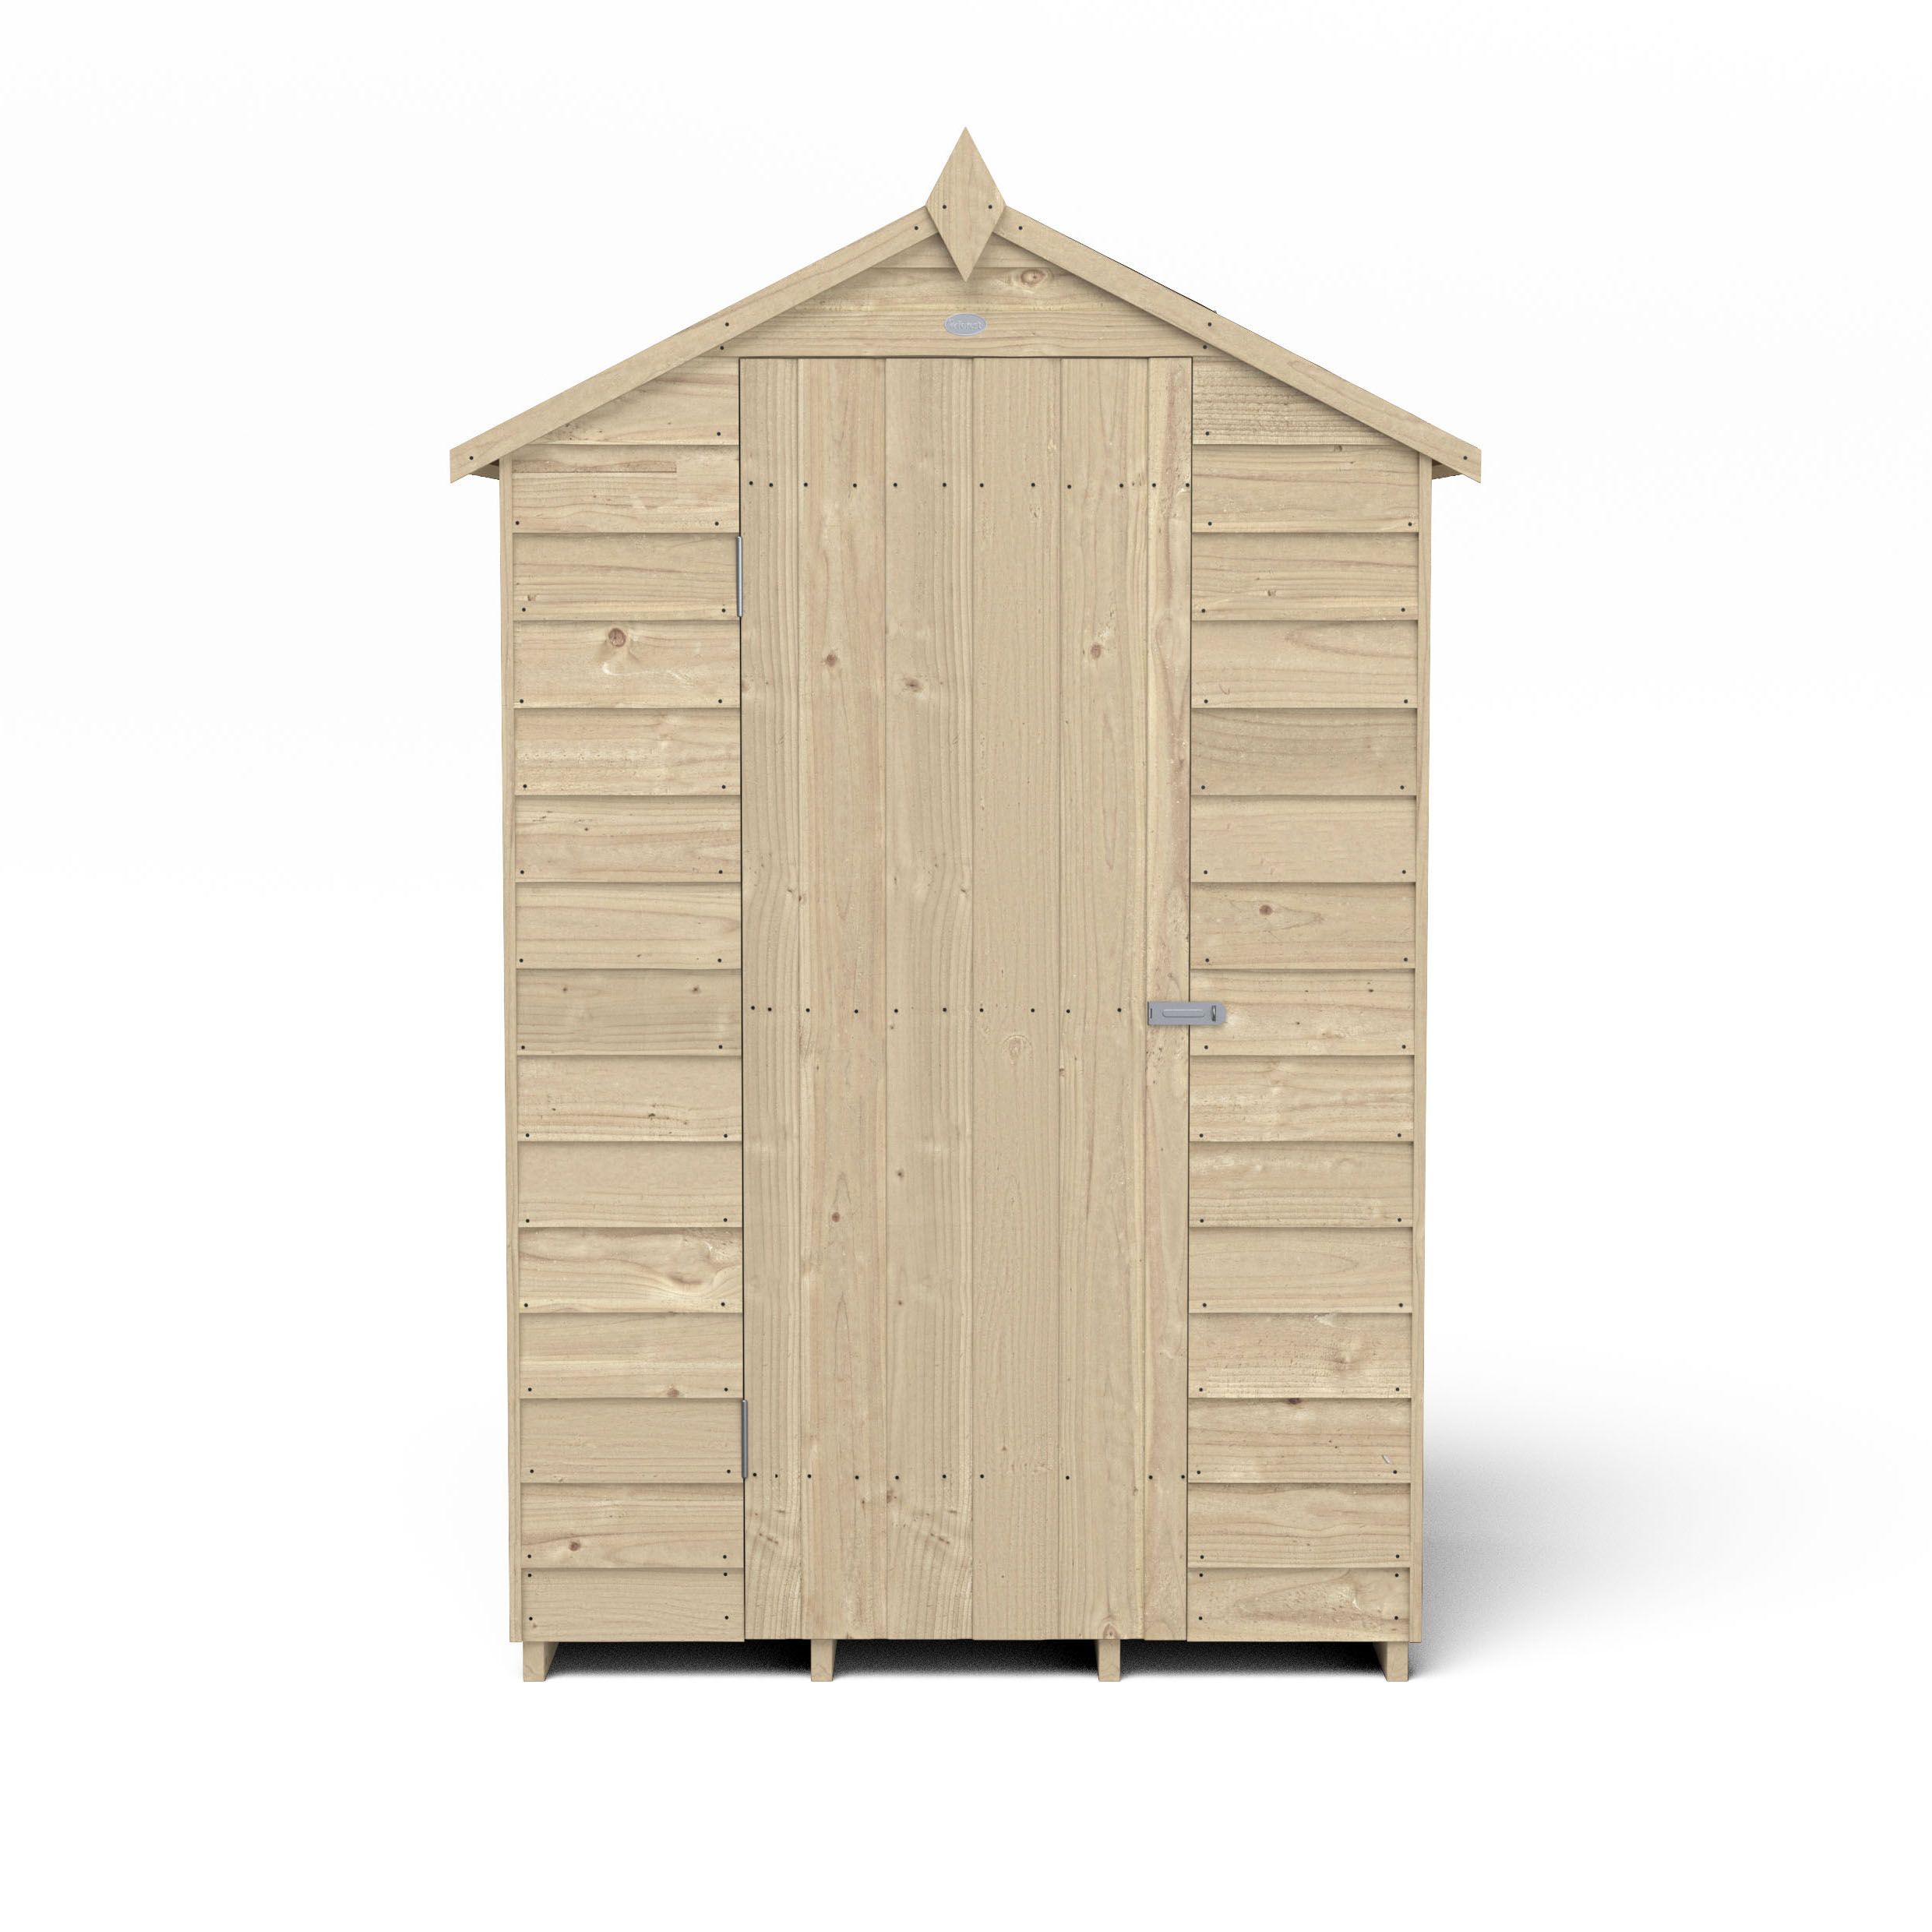 Forest Garden Overlap 4x3 ft Apex Wooden Pressure treated Shed with floor - Assembly service included